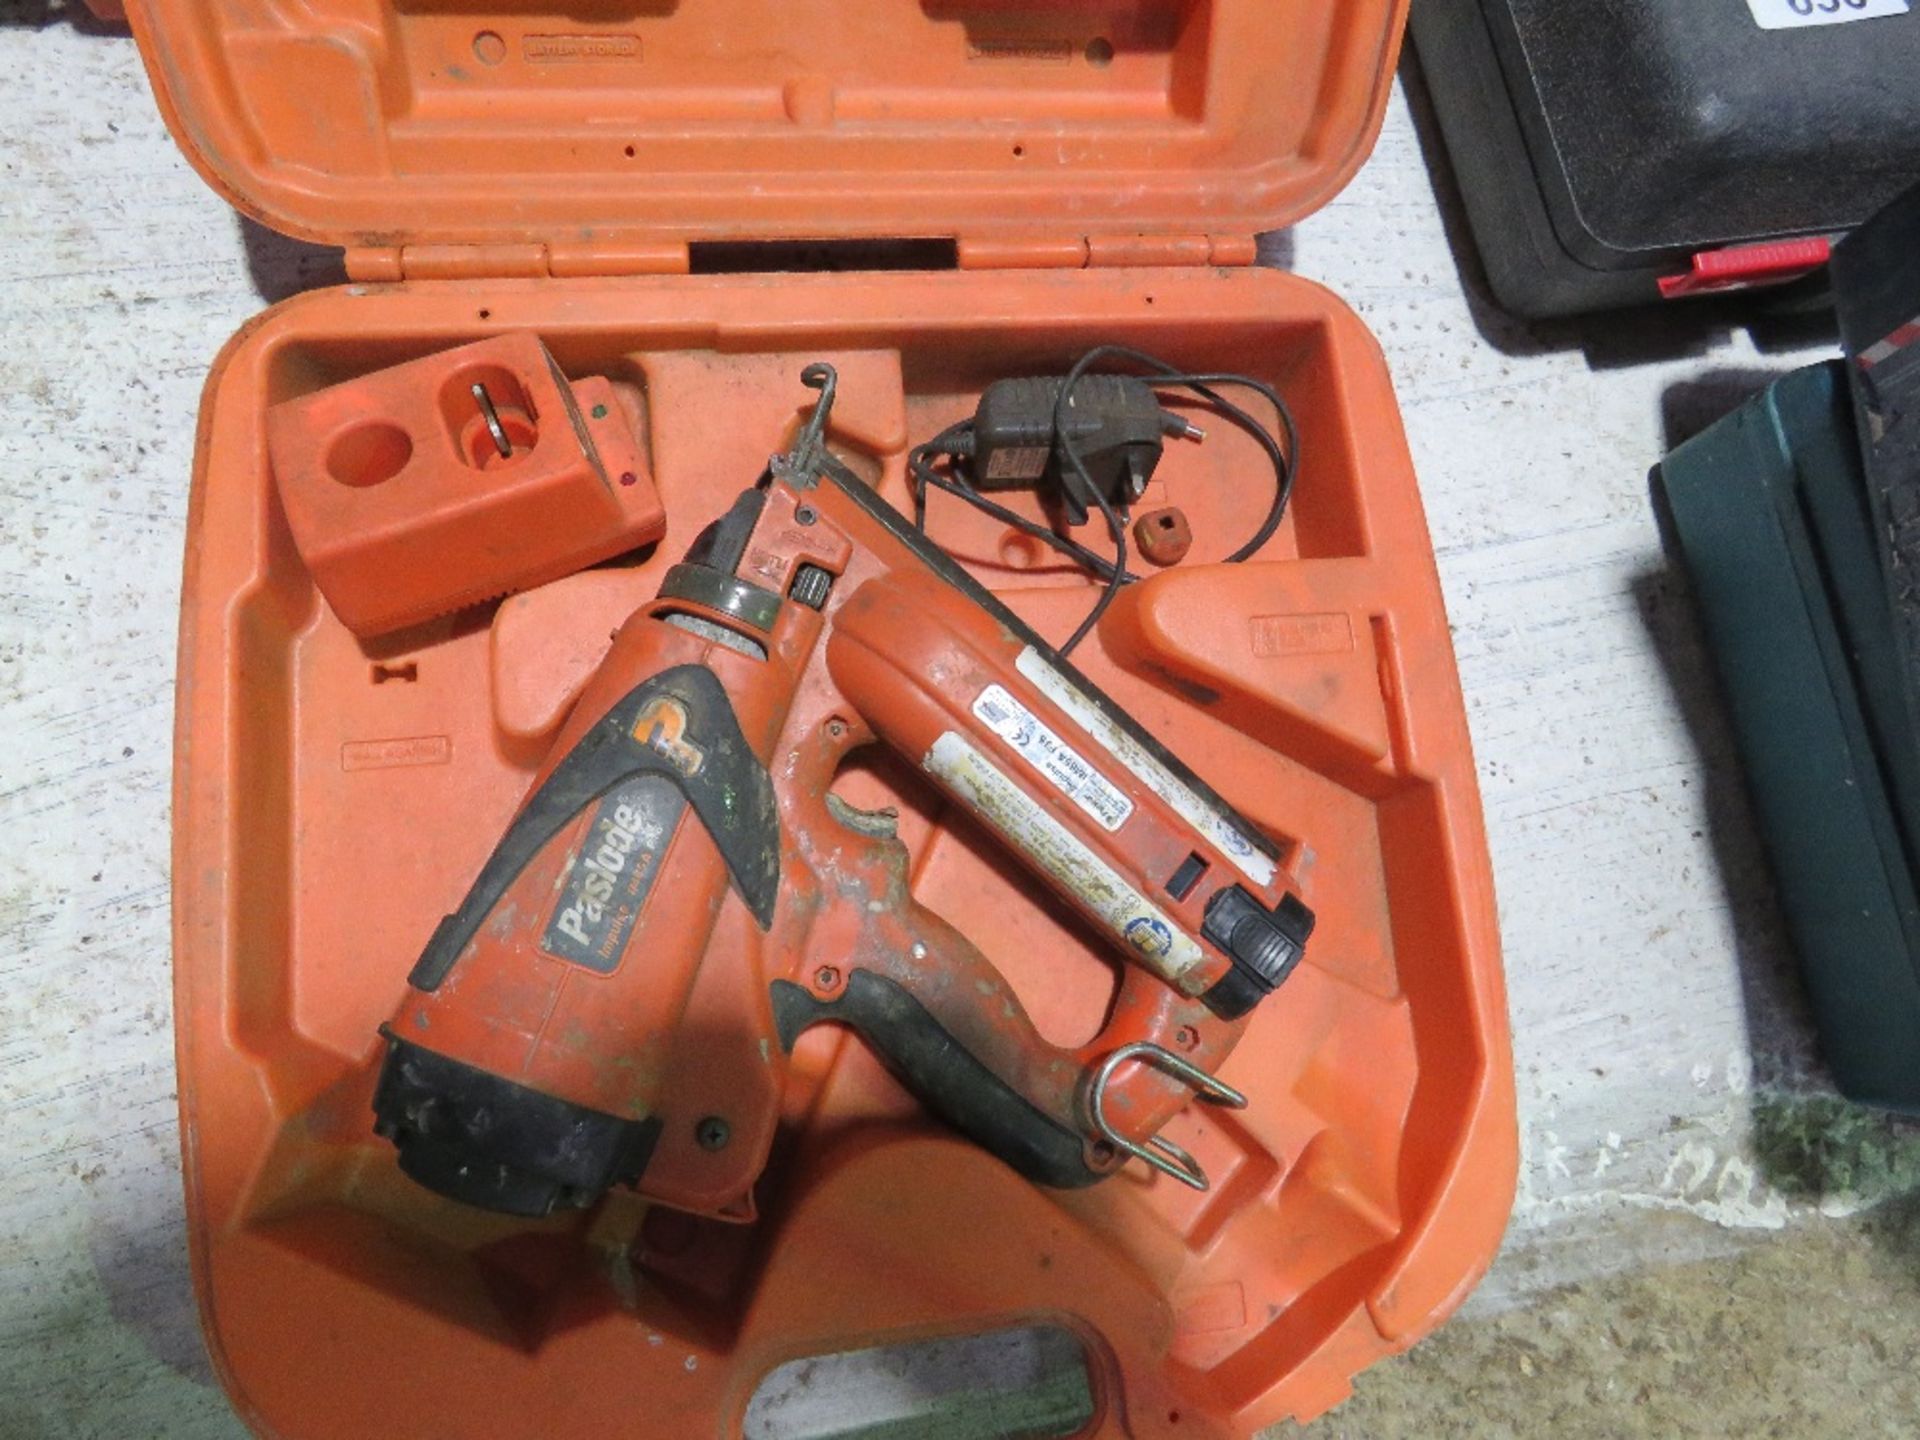 PASLODE F16 SECOND FIX NAIL GUN.....THIS LOT IS SOLD UNDER THE AUCTIONEERS MARGIN SCHEME, THEREFORE